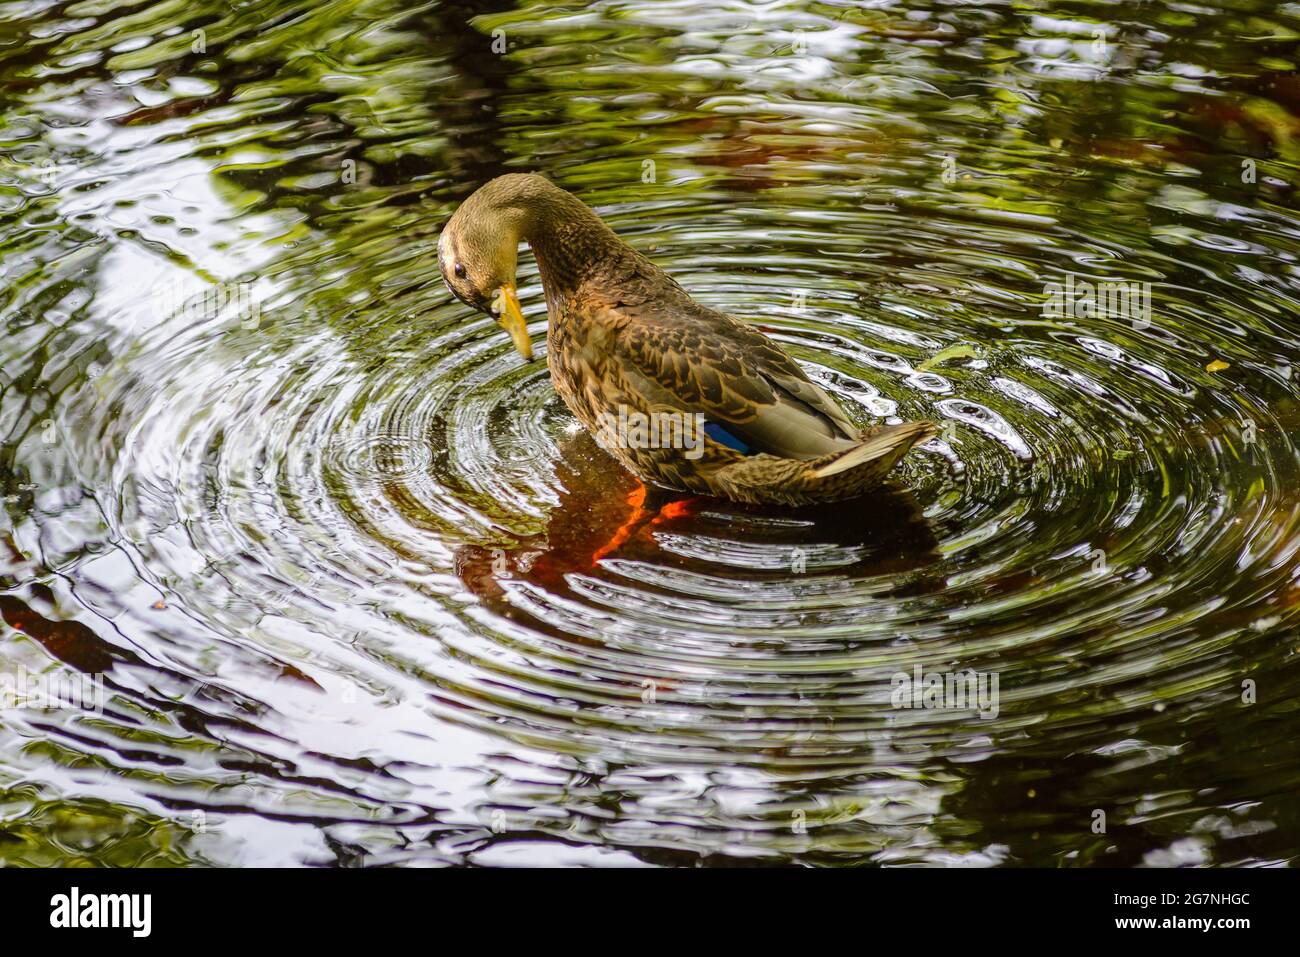 Fritham, New Forest, Hampshire, UK, 15th July 2021, Weather: Wow, look at my feet! Sunlight penetrates the water of Eyeworth Pond and illuminates a duck’s orange feet under the surface. Sunny at times and warm temperatures rising. Credit: Paul Biggins/Alamy Live News Stock Photo